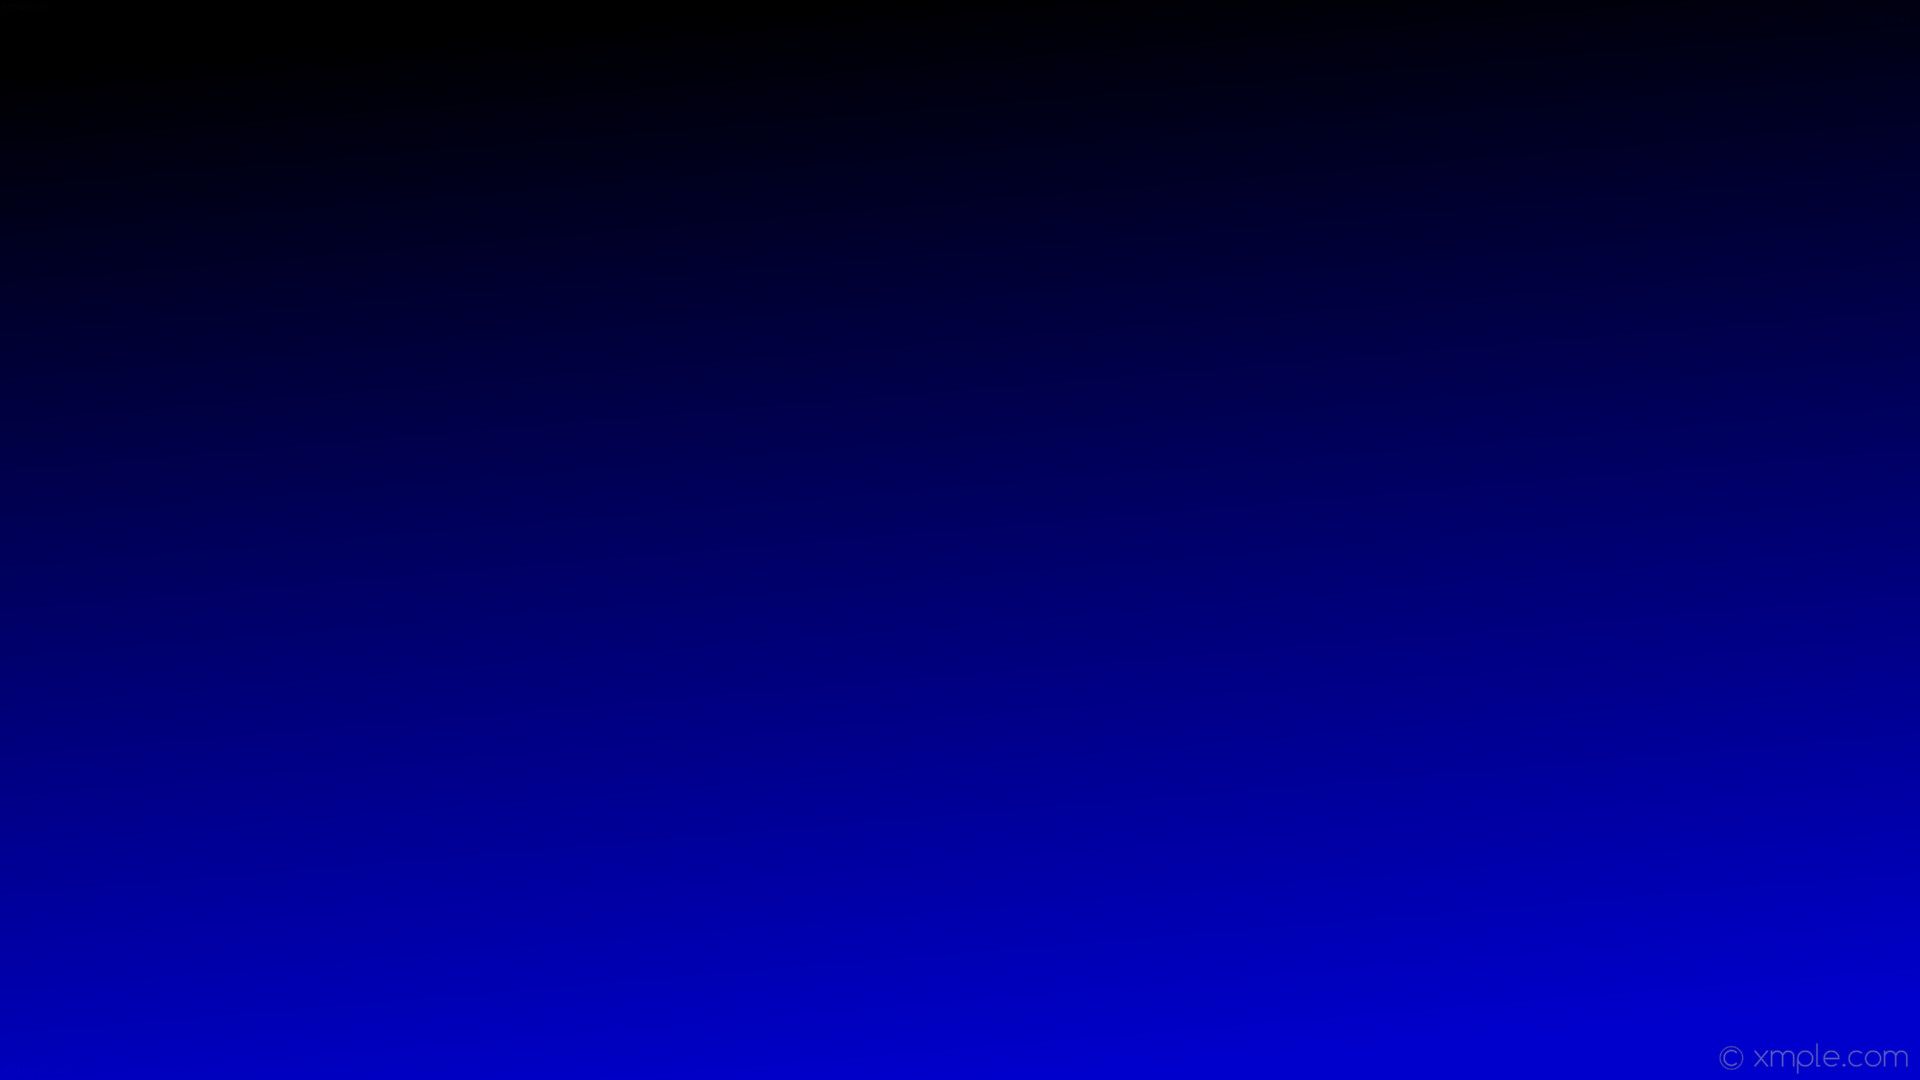 Dark Blue Ombre Wallpapers - 4K, Hd Dark Blue Ombre Backgrounds On